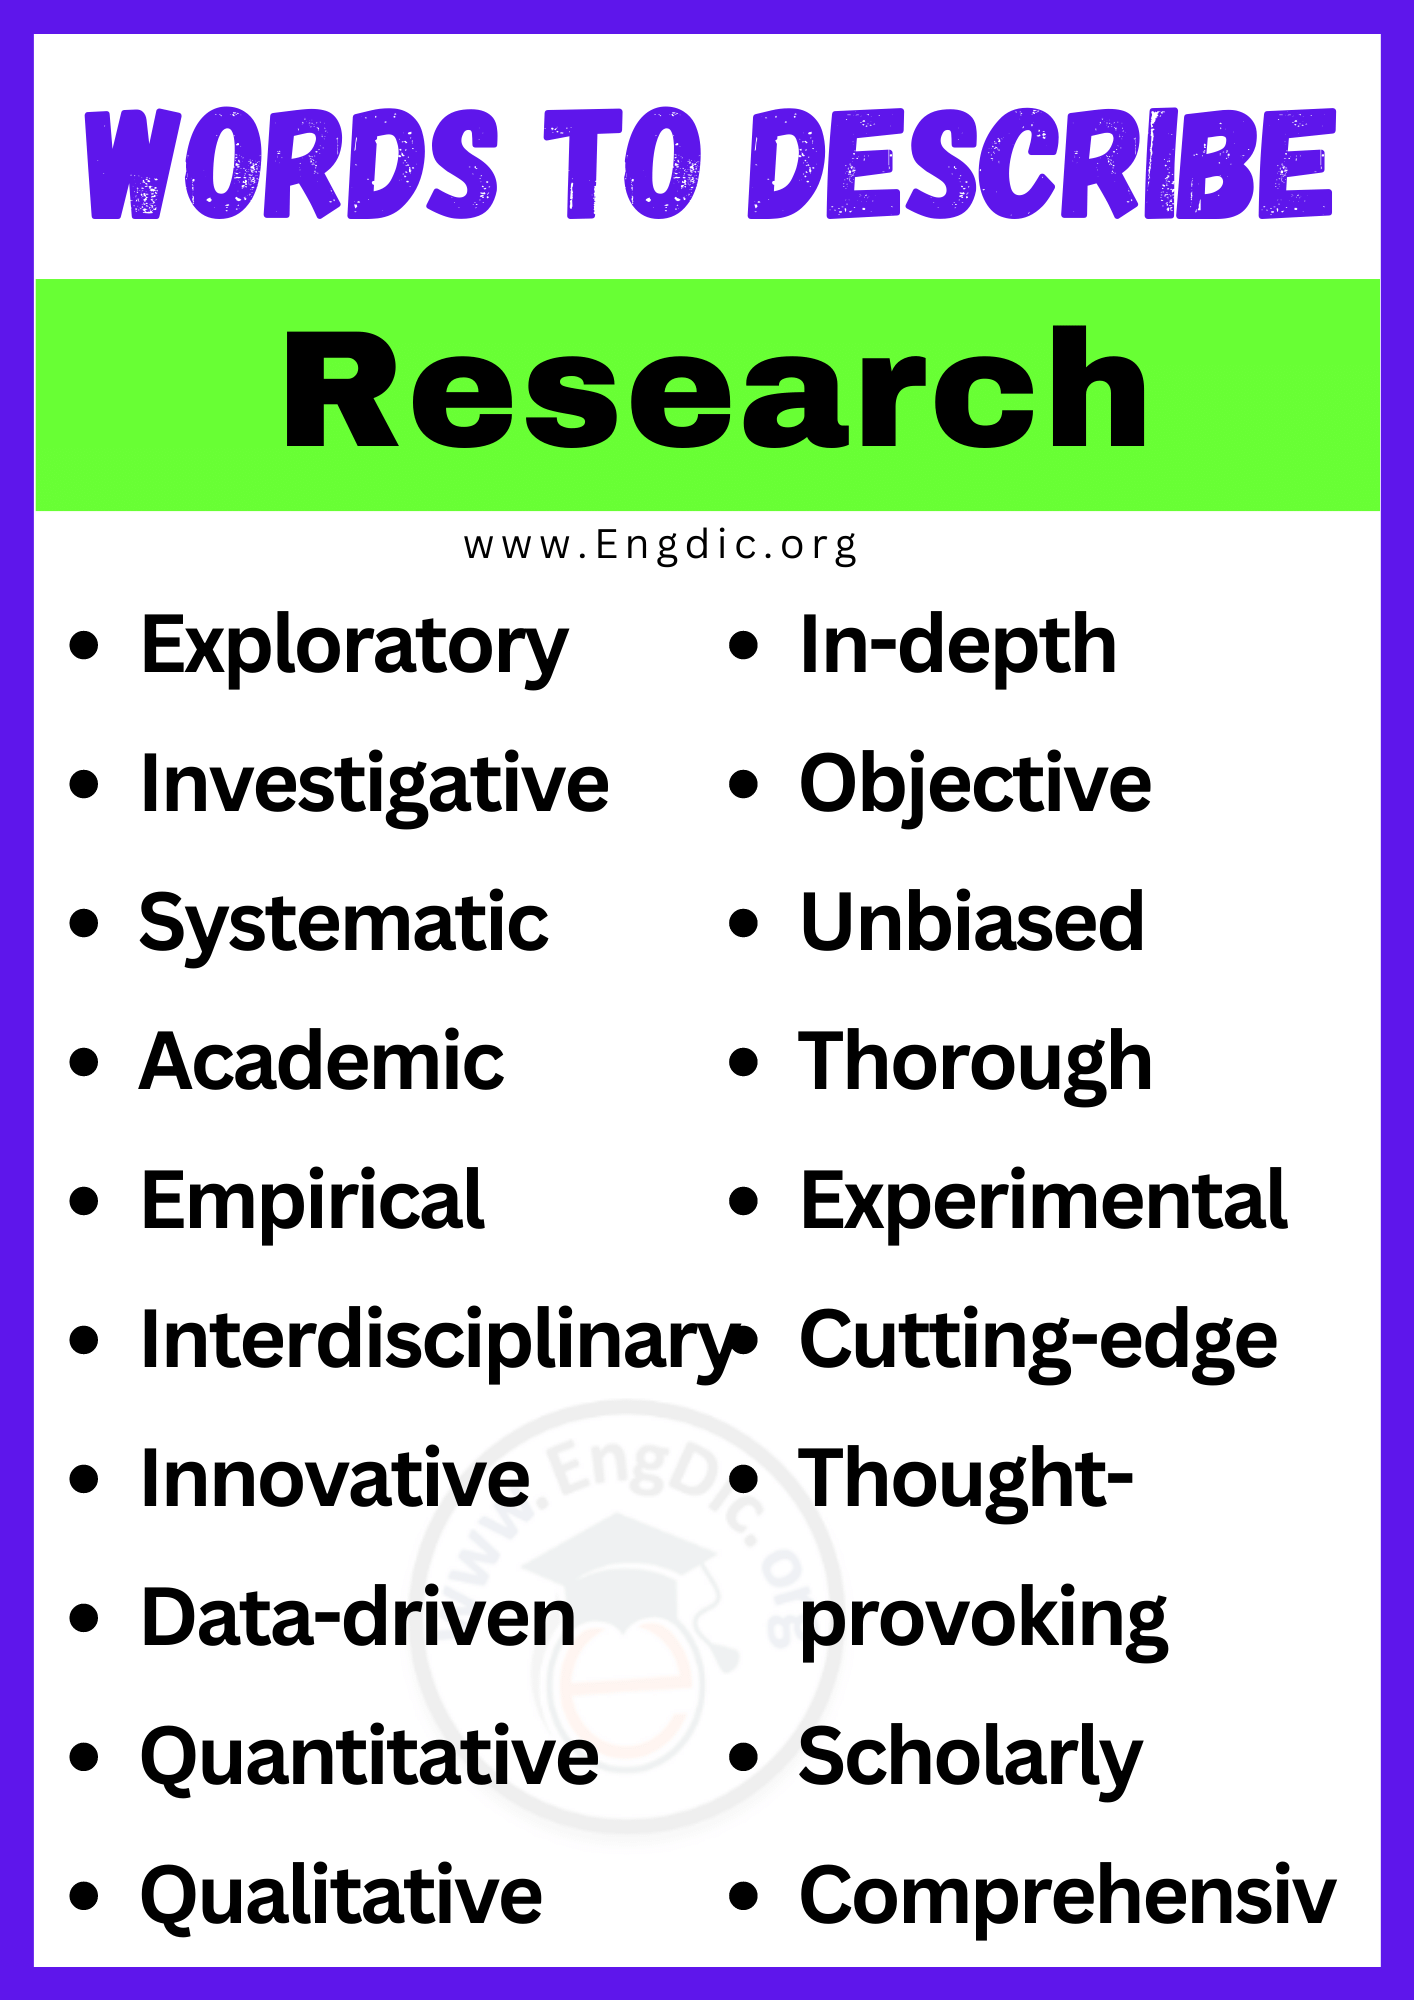 Words to Describe Research